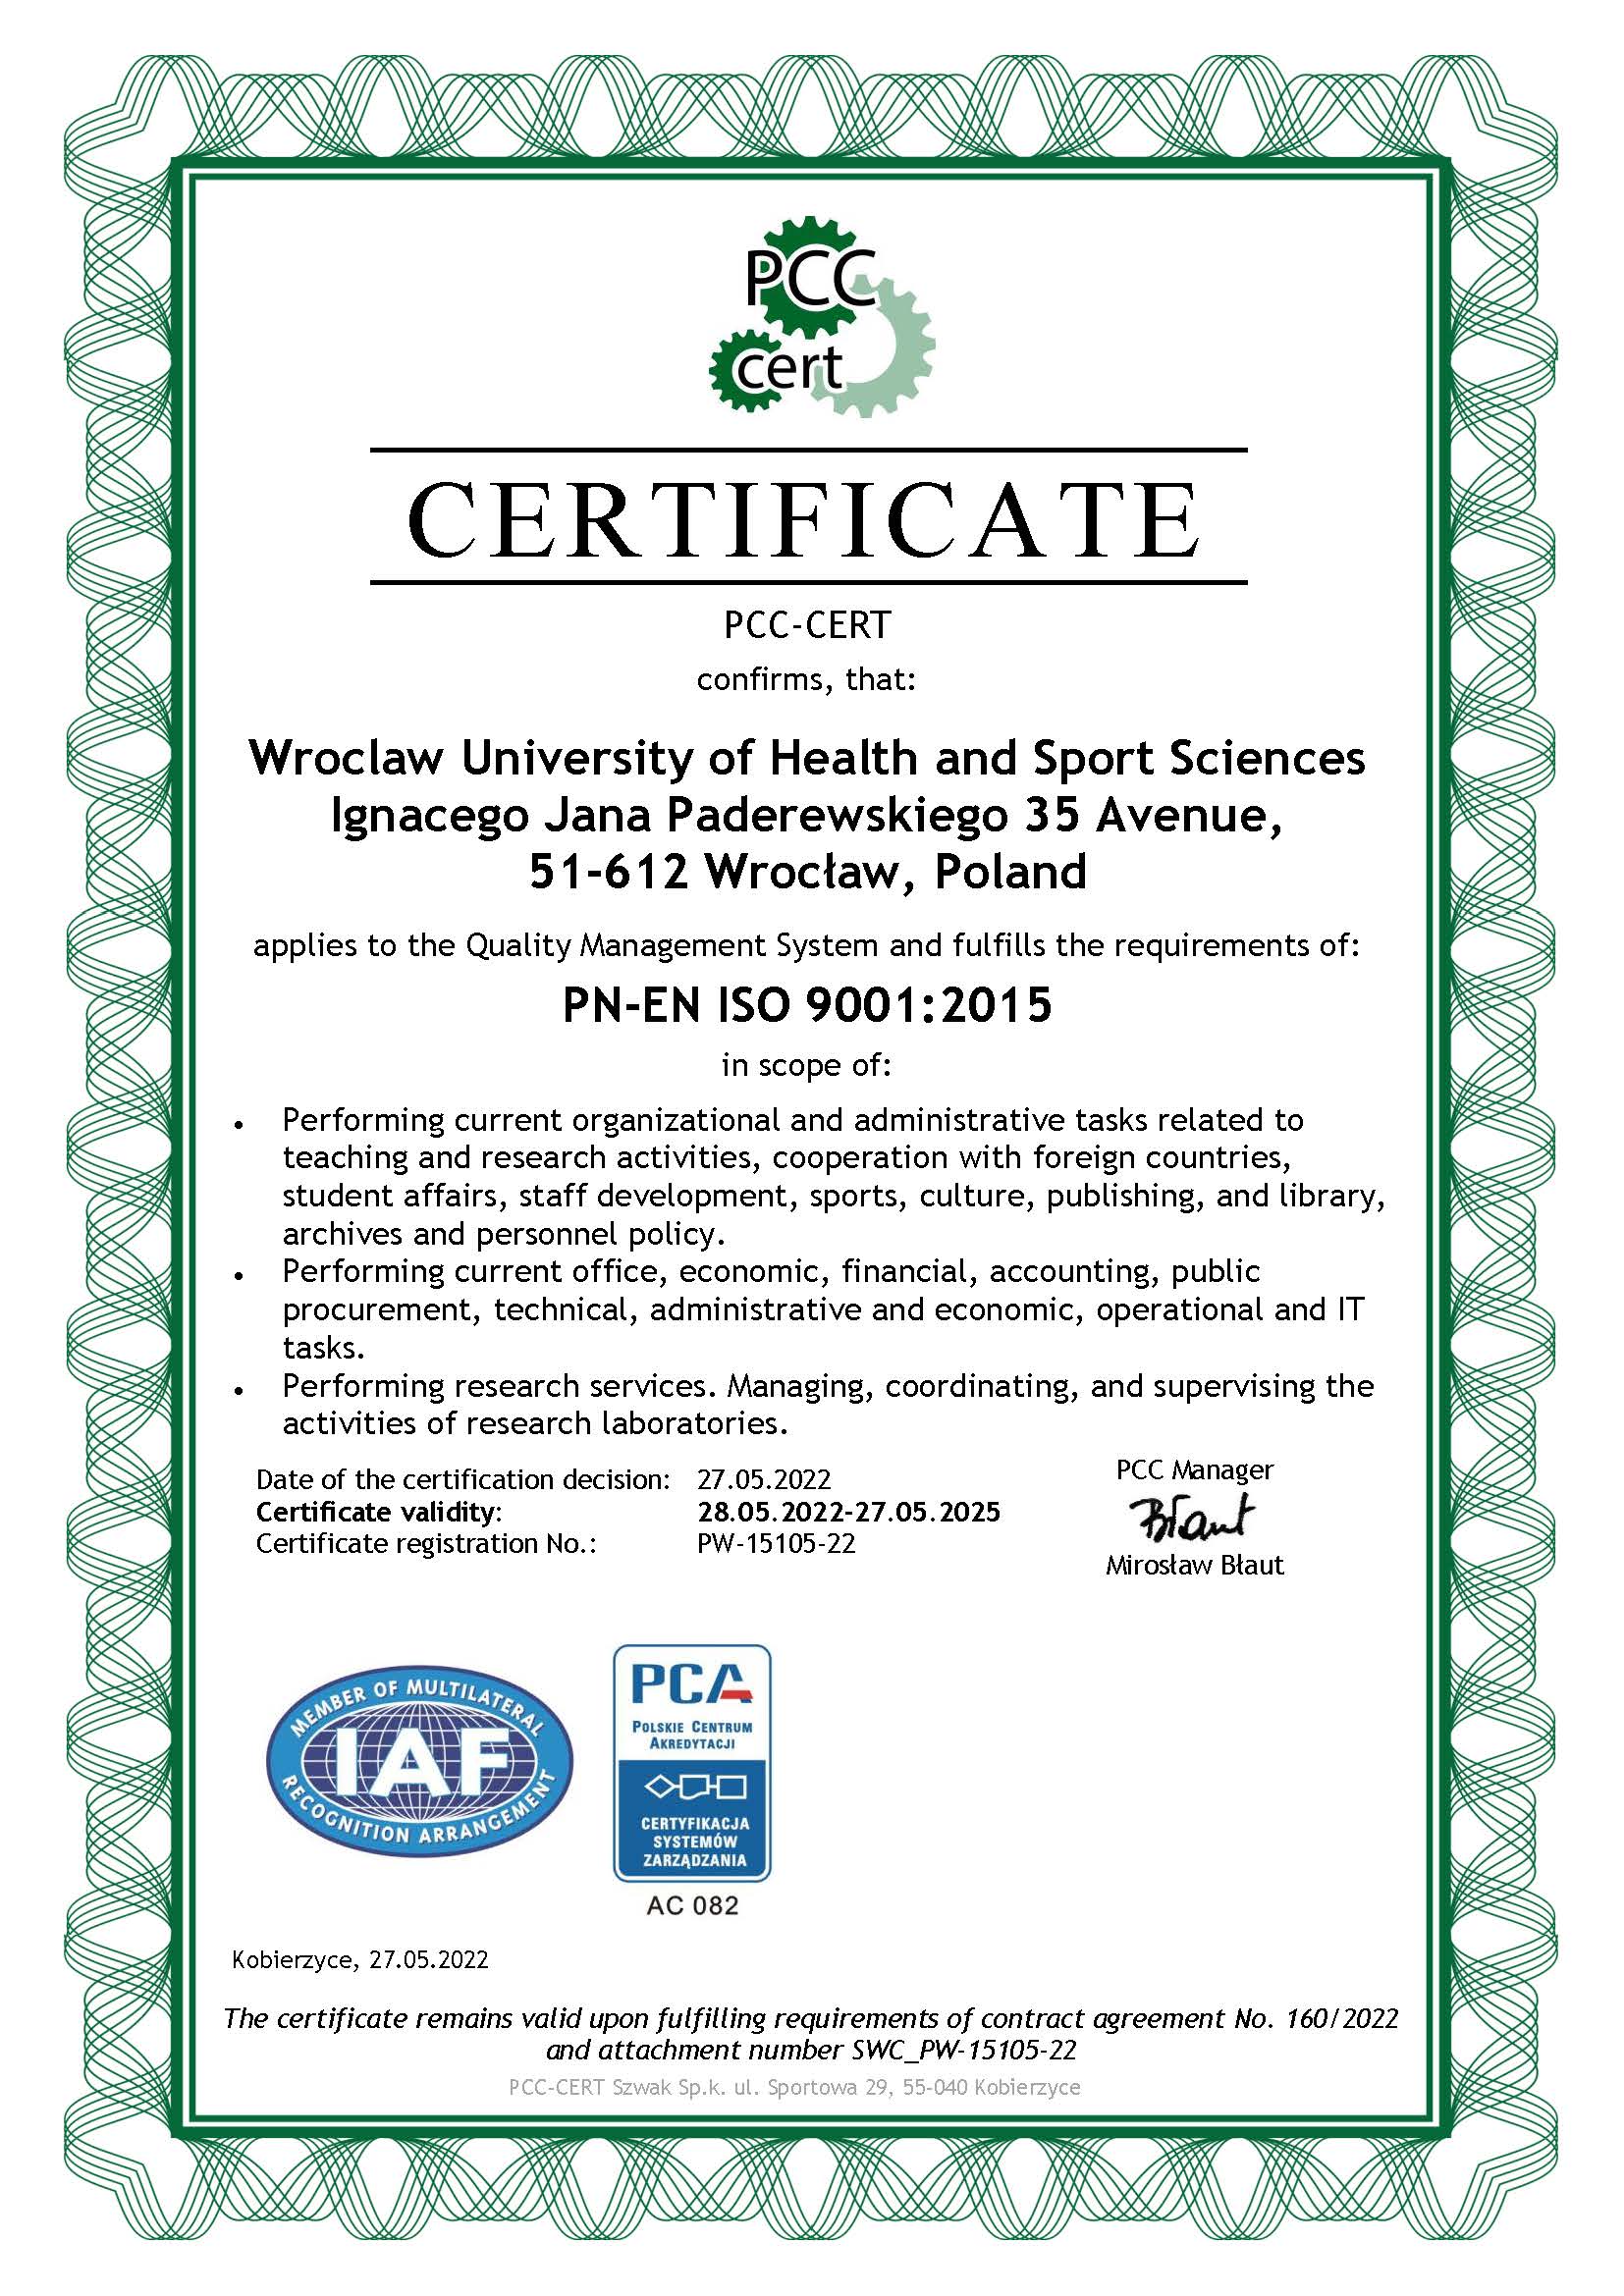 ertificated organization: Wroclaw University of Health and Sport Sciences